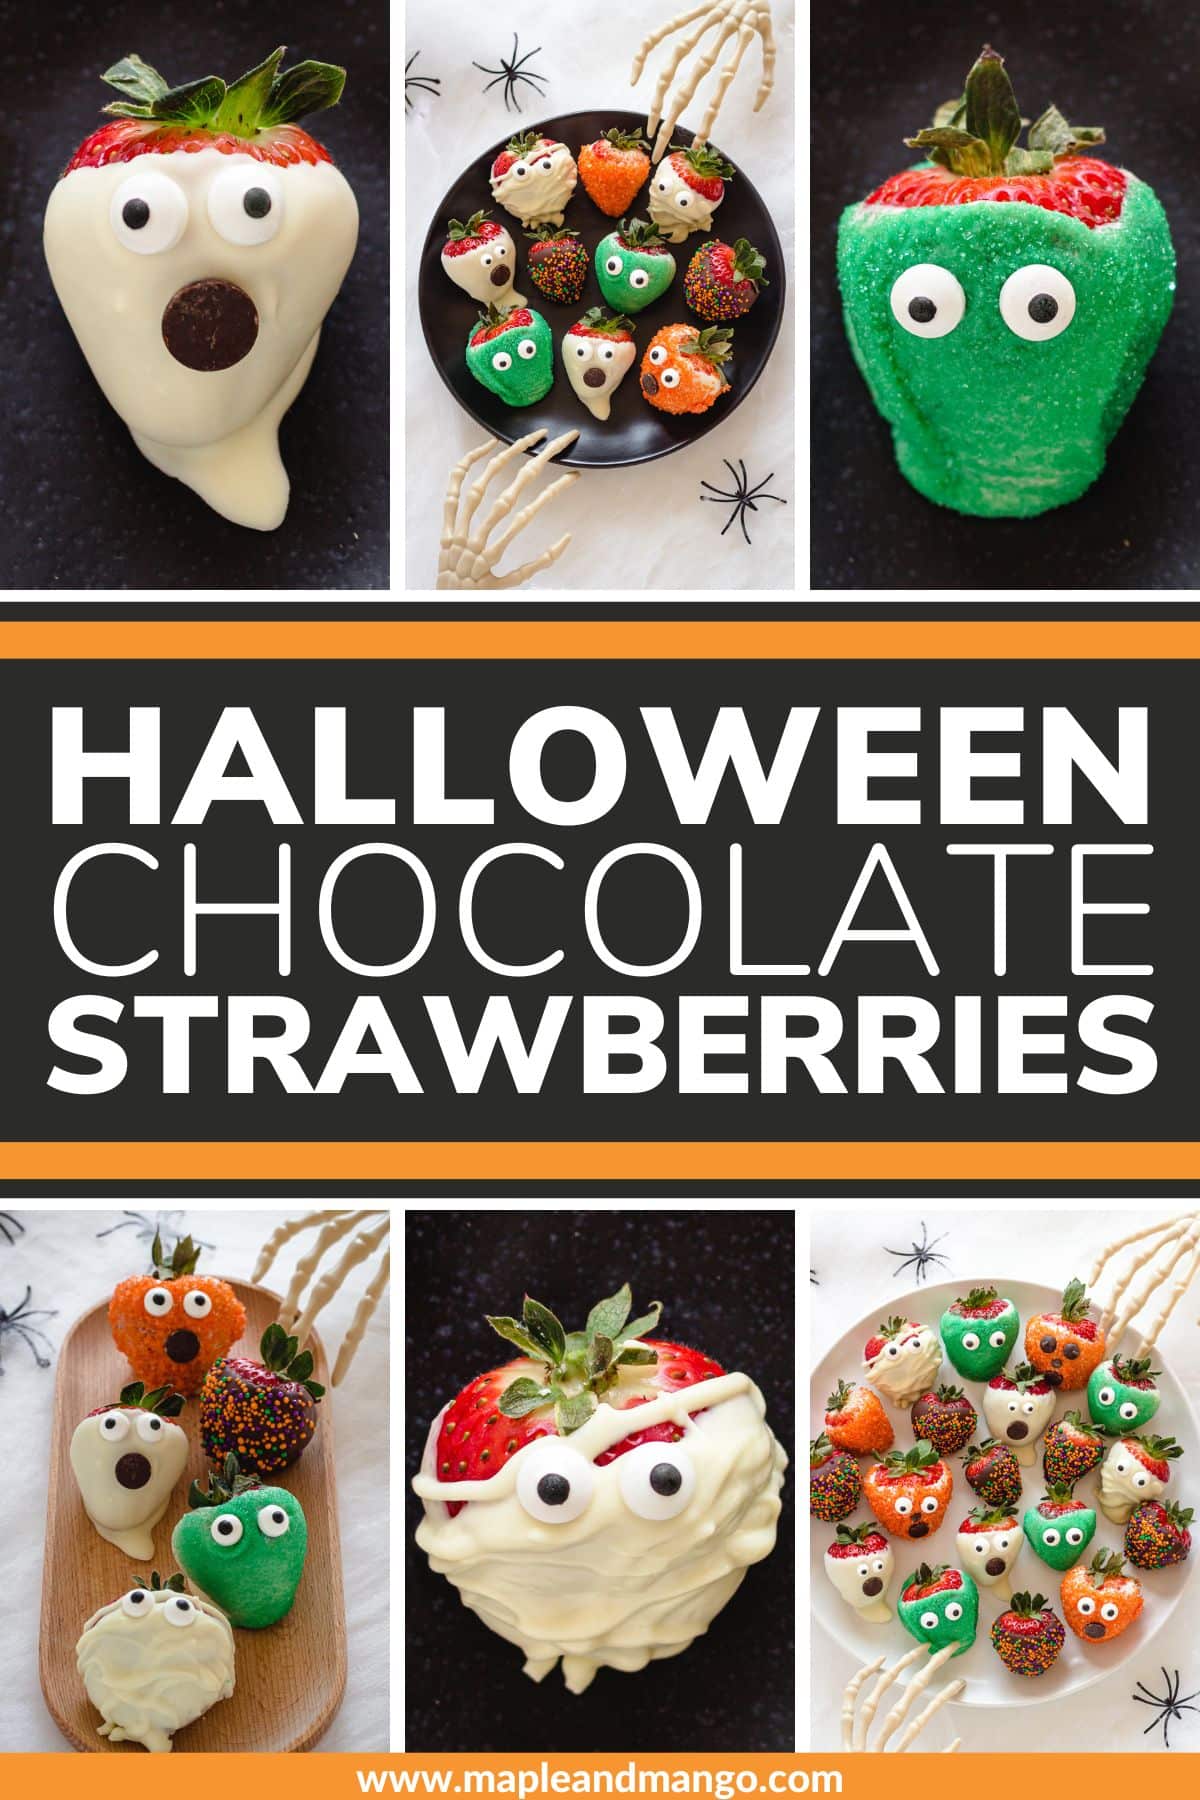 Photo collage showing Halloween strawberries with text overlay "Halloween Chocolate Strawberries".